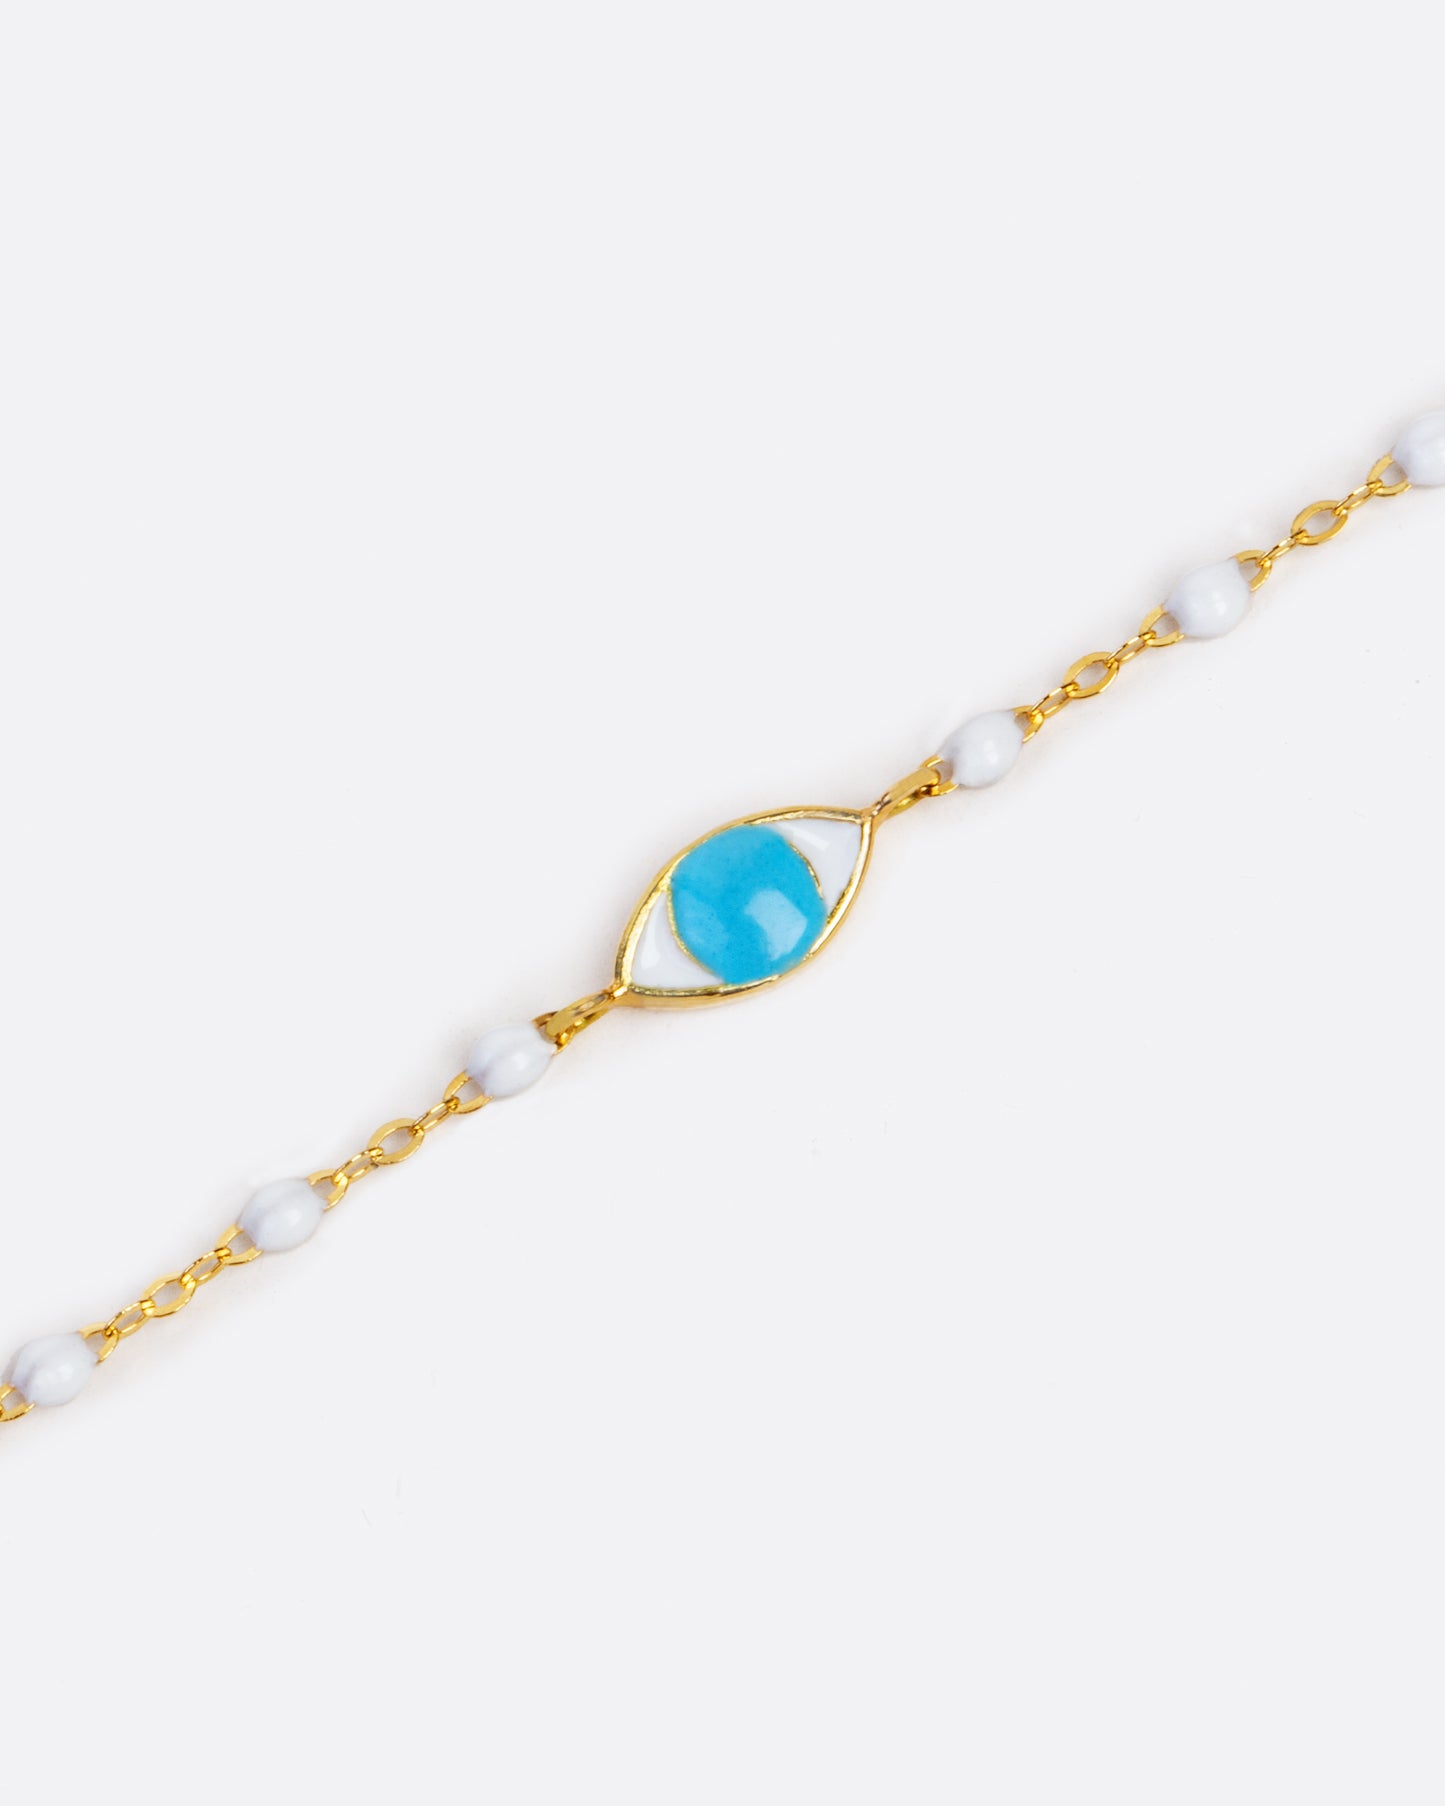 Yellow gold bracelet dipped in white resin, to create a beaded effect. In the middle is an eye charm with a blue resin iris.